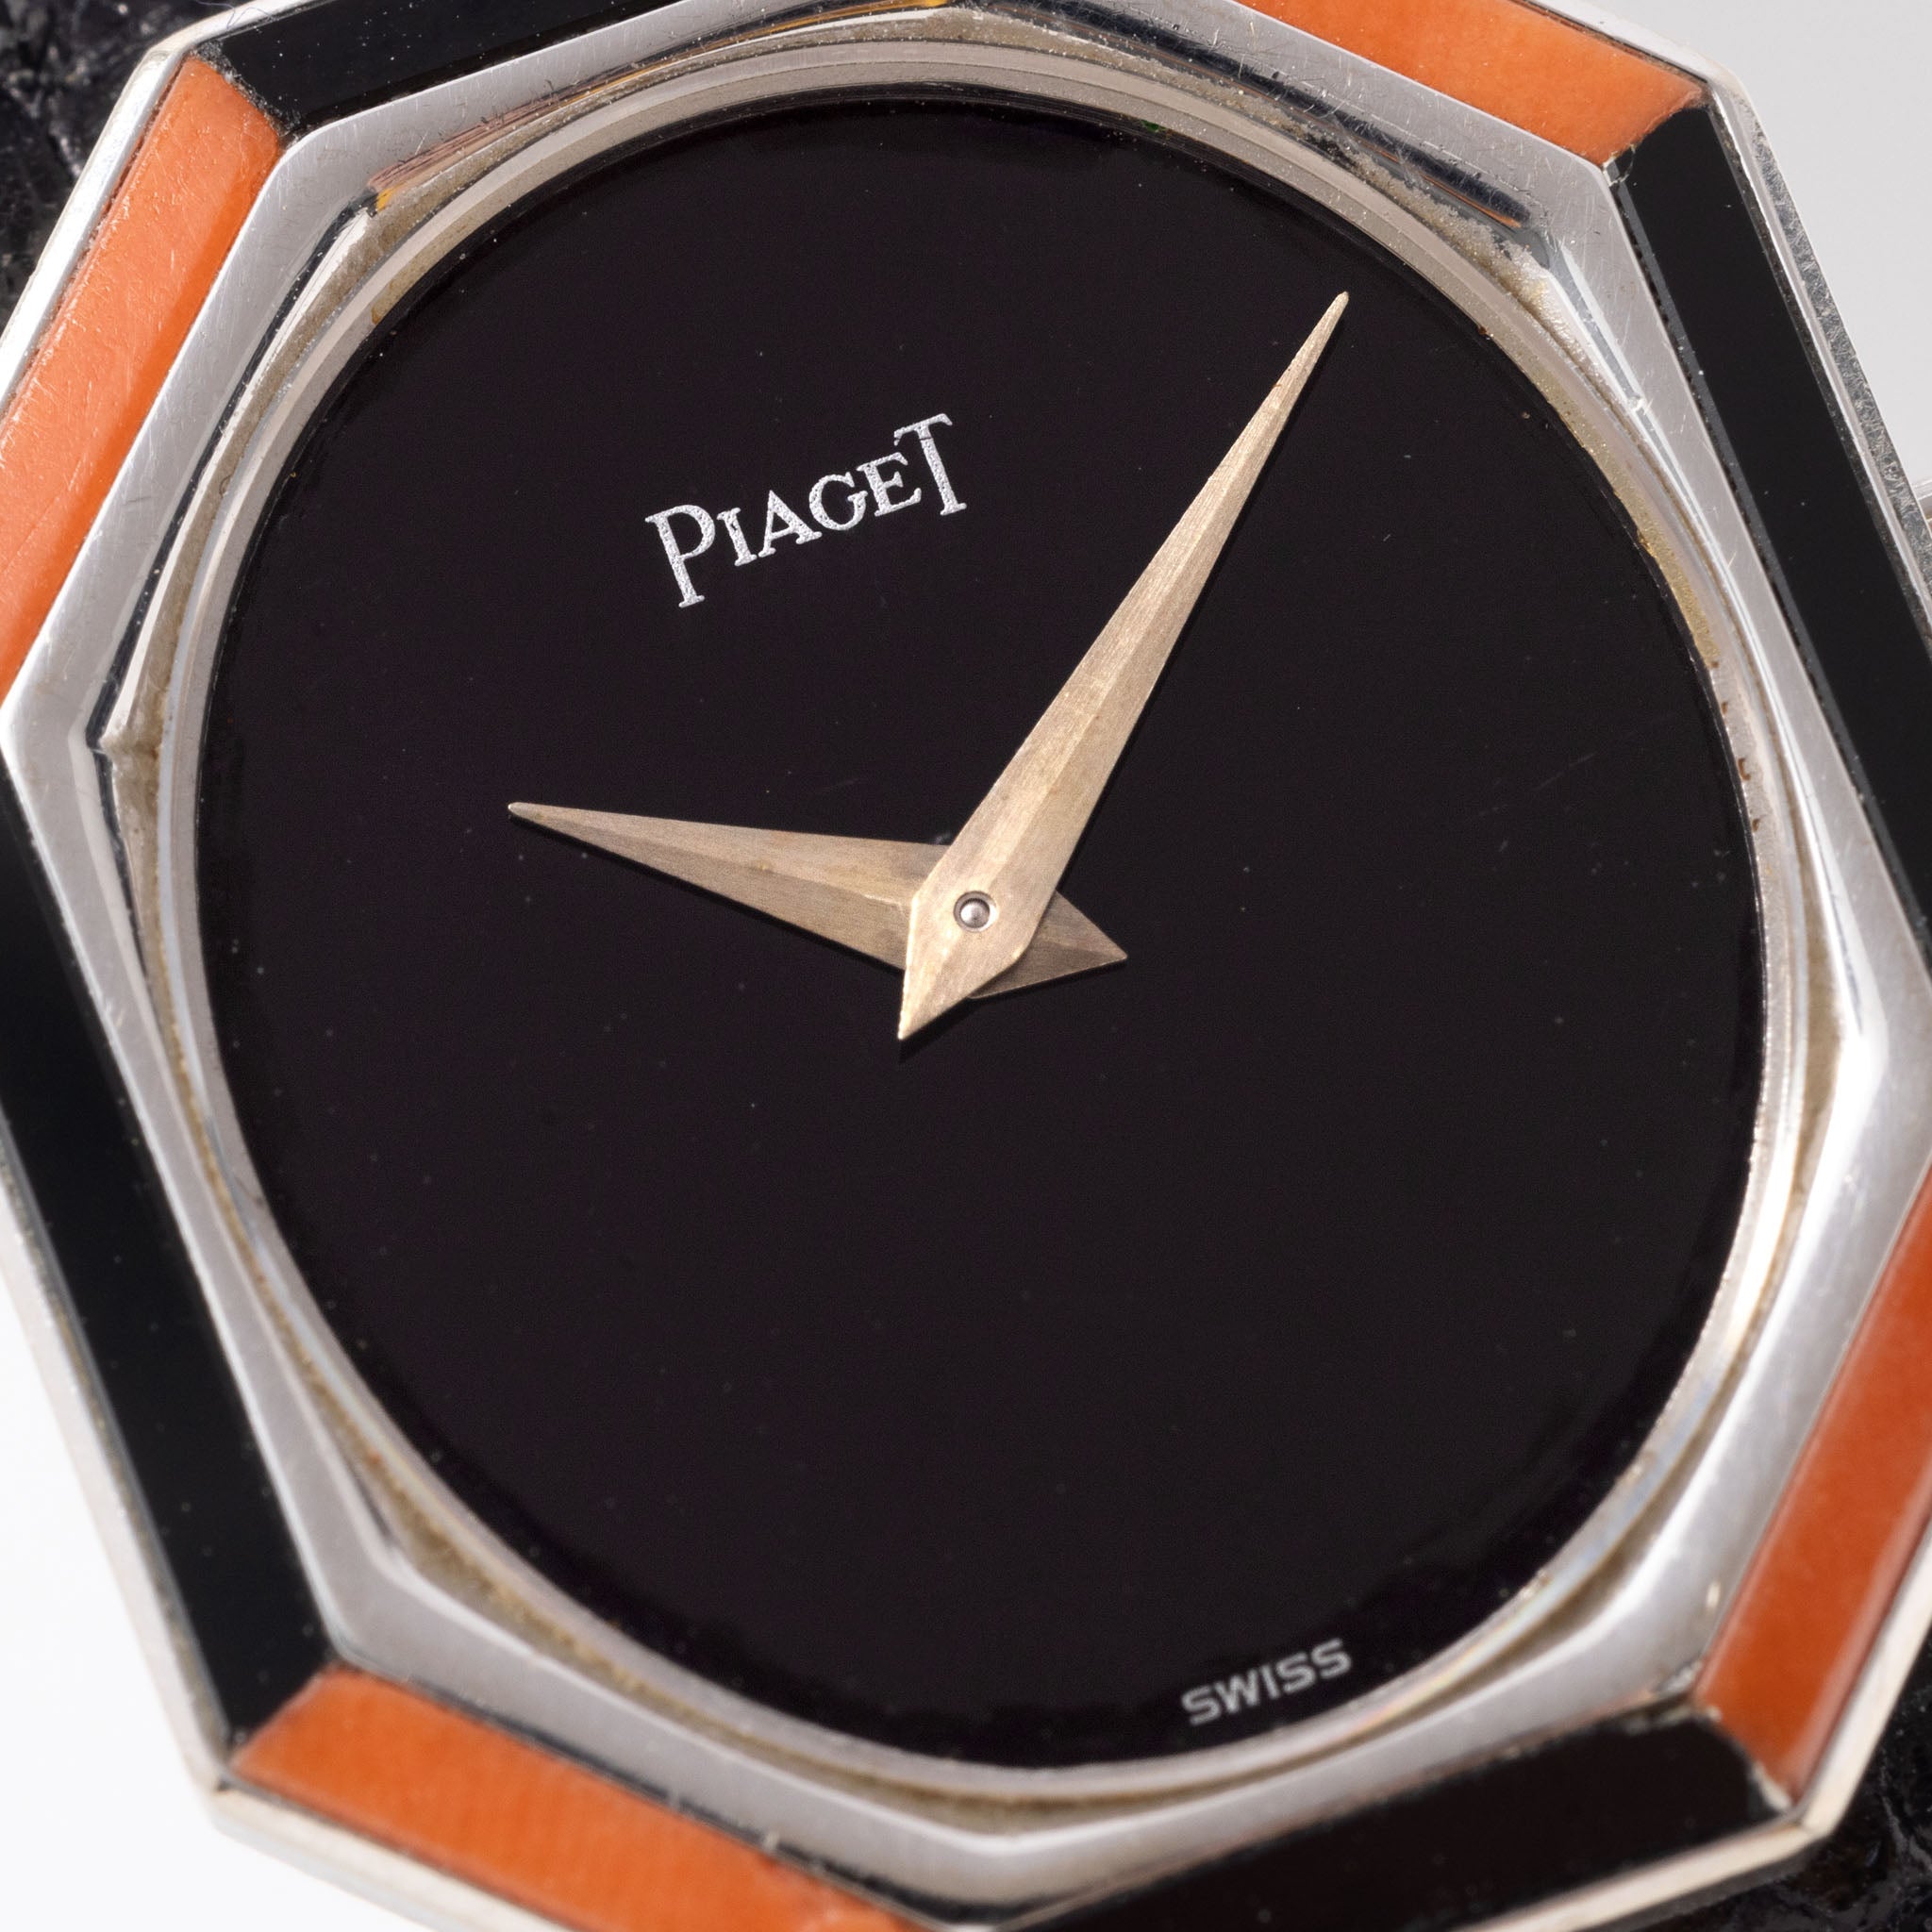 Piaget 18k White Gold Dress watch with Onyx and Coral Ref 9341